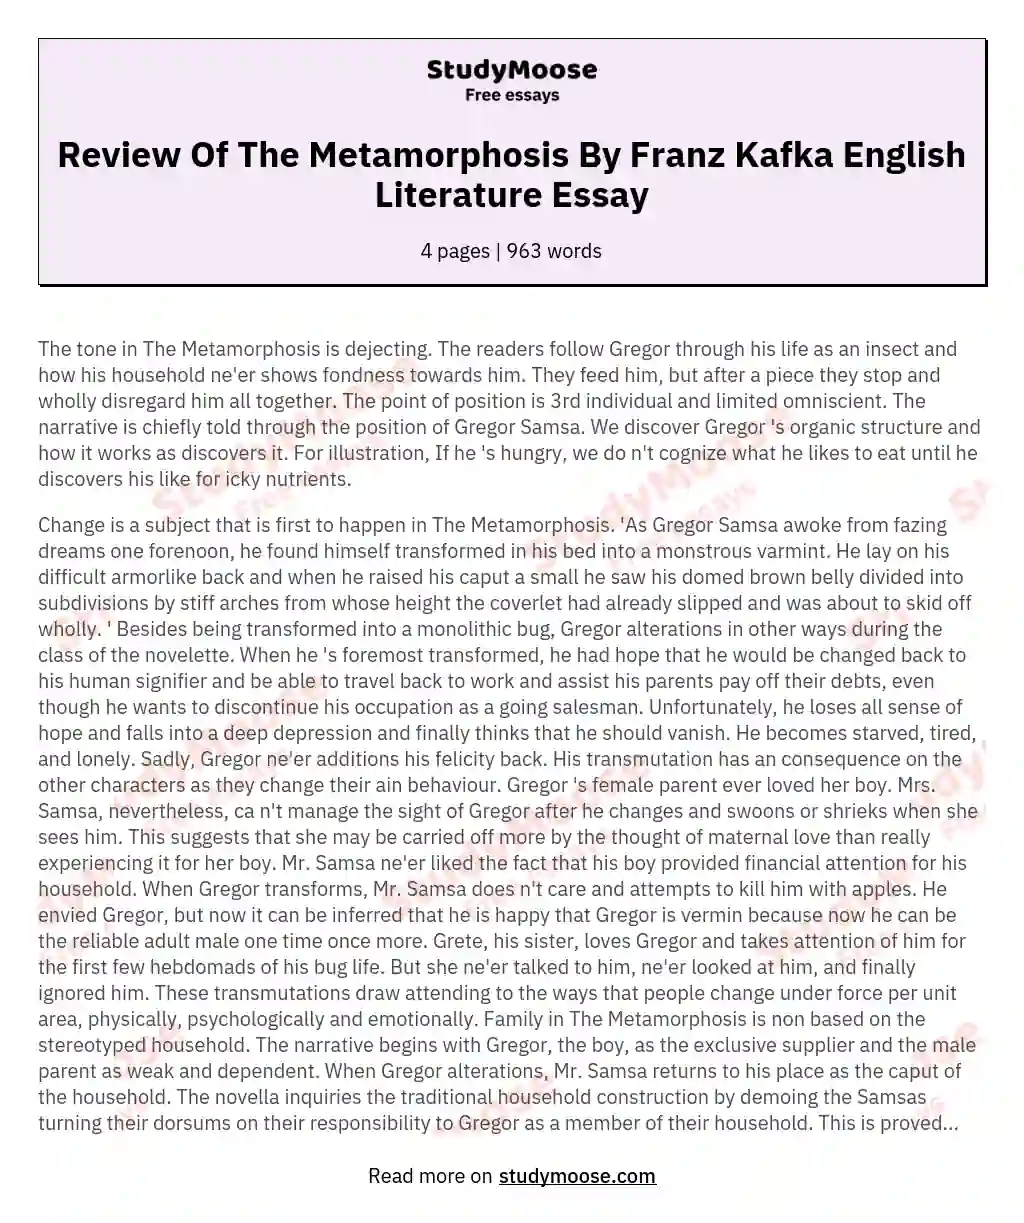 Review Of The Metamorphosis By Franz Kafka English Literature Essay